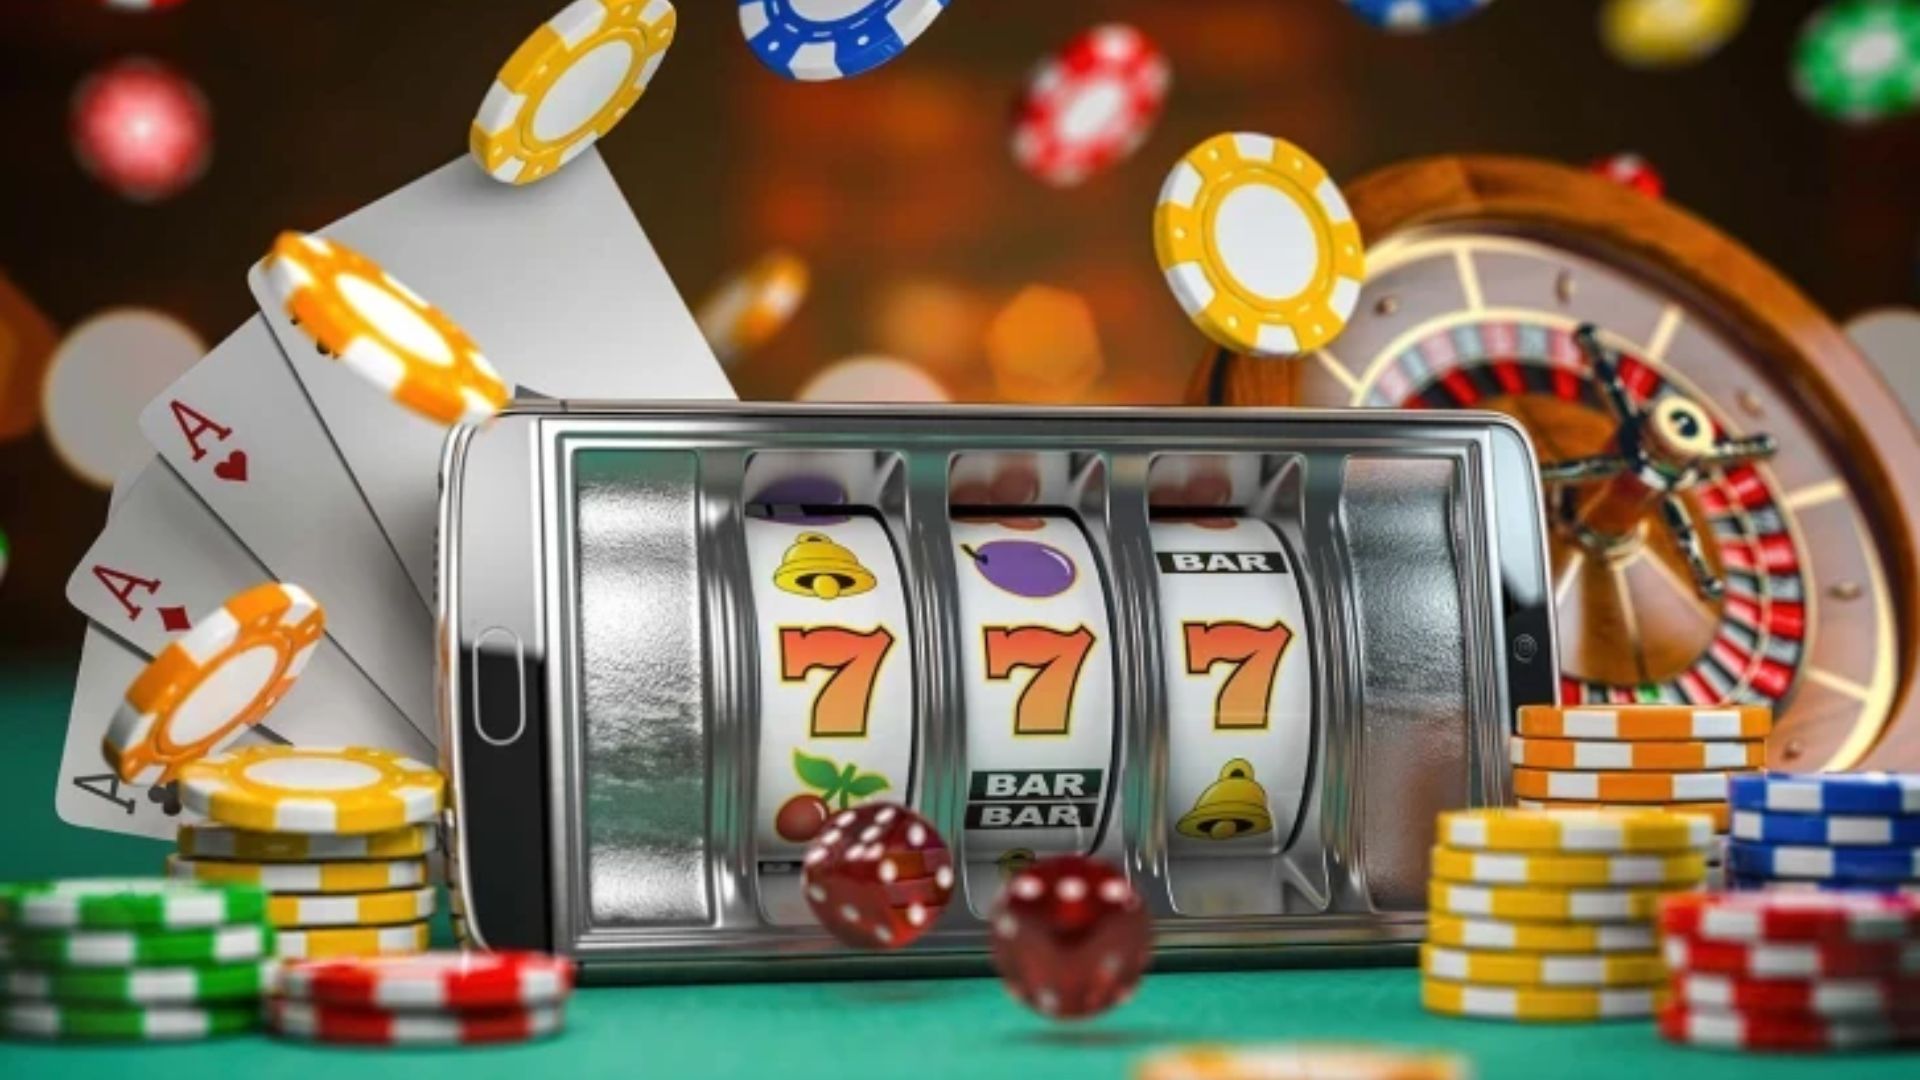 Casino Chips and A Smart Phone Showing Casino Games 